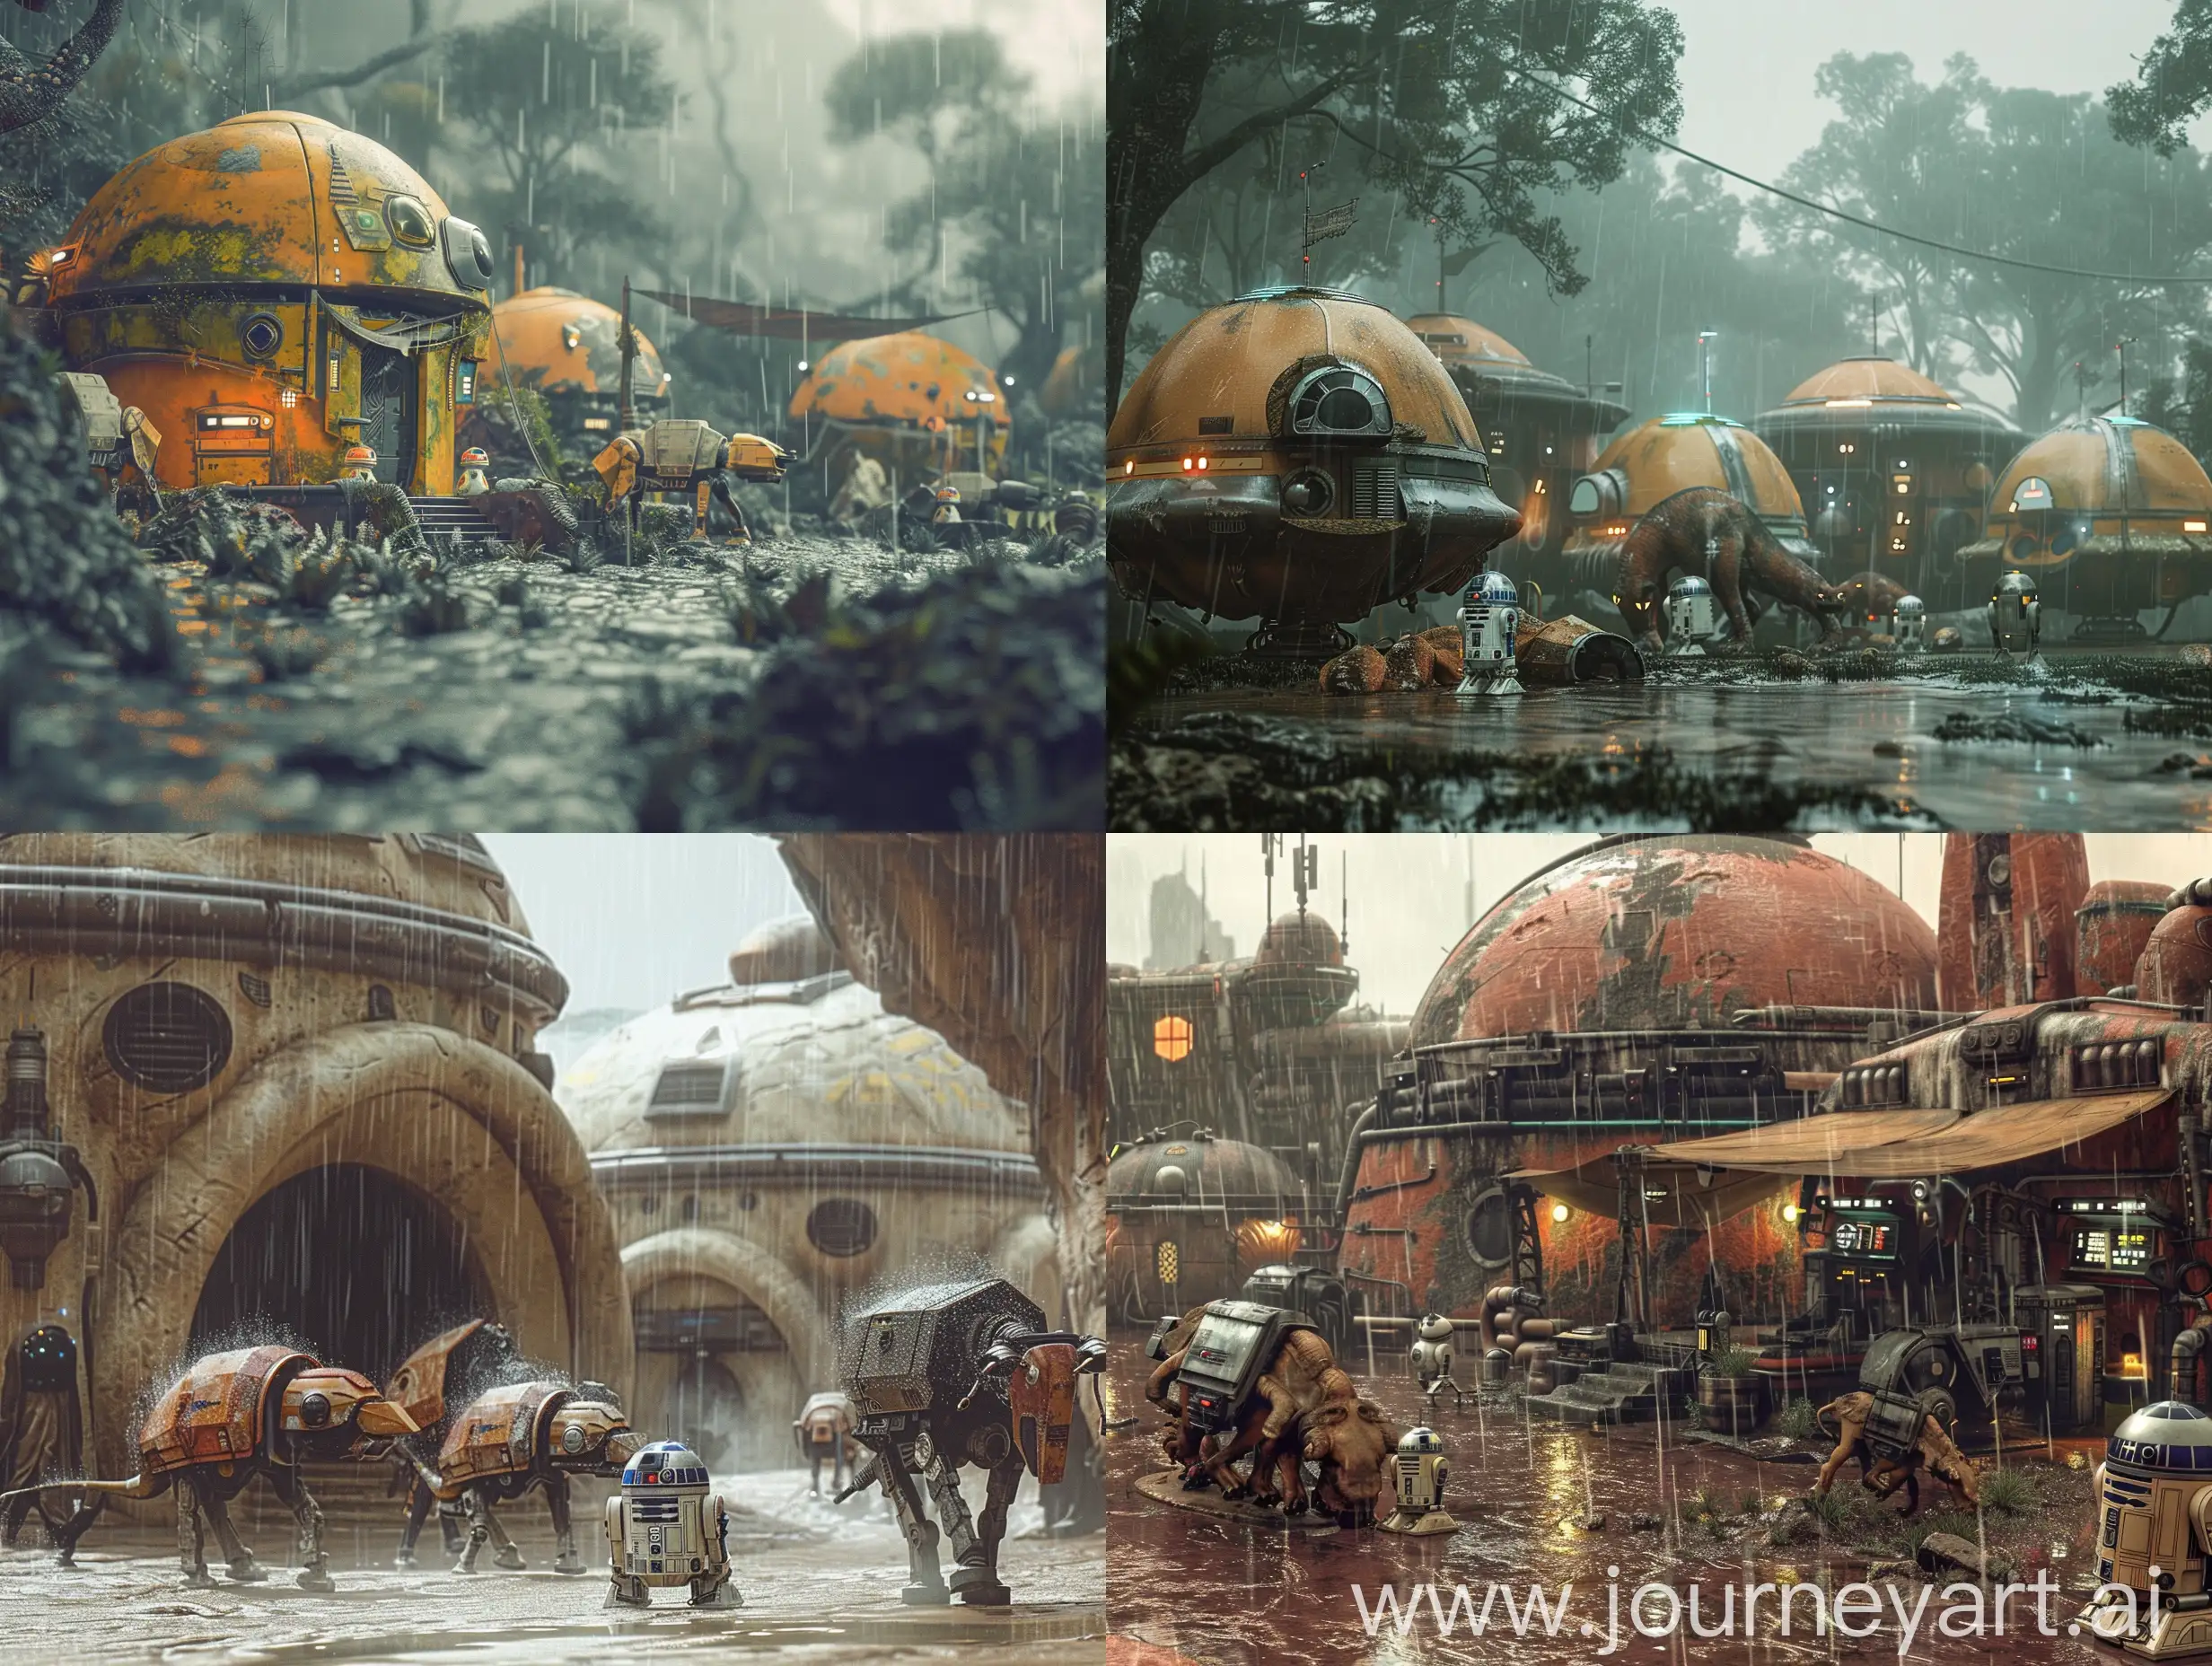 Miniature-Alien-Village-Star-Wars-Style-with-Burden-Beasts-Droids-and-Moody-Rain